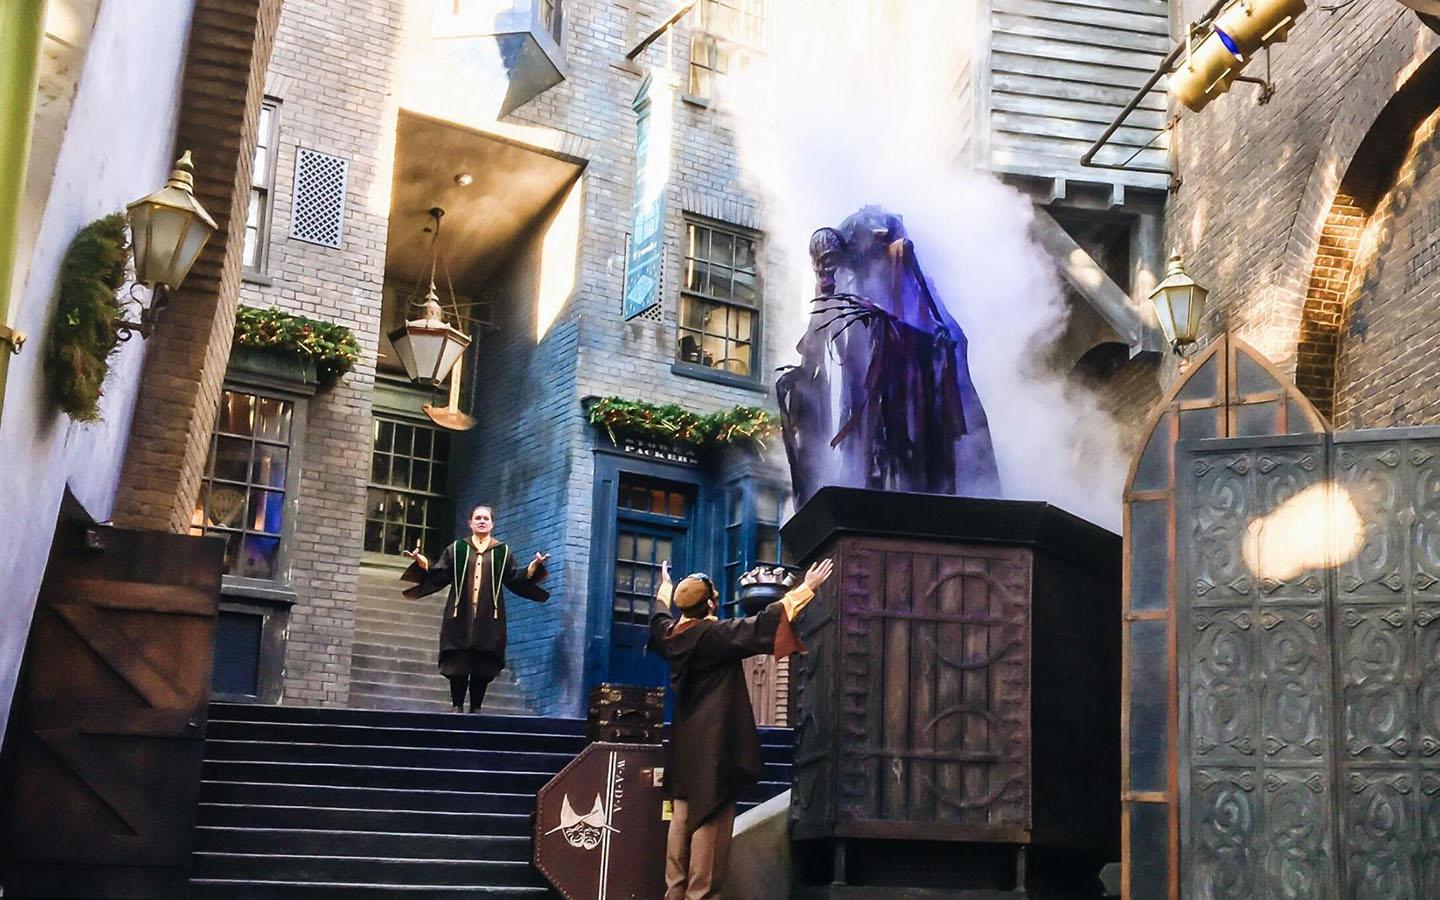 The Tales of Beedle the Bard at The Wizarding World of Harry Potter